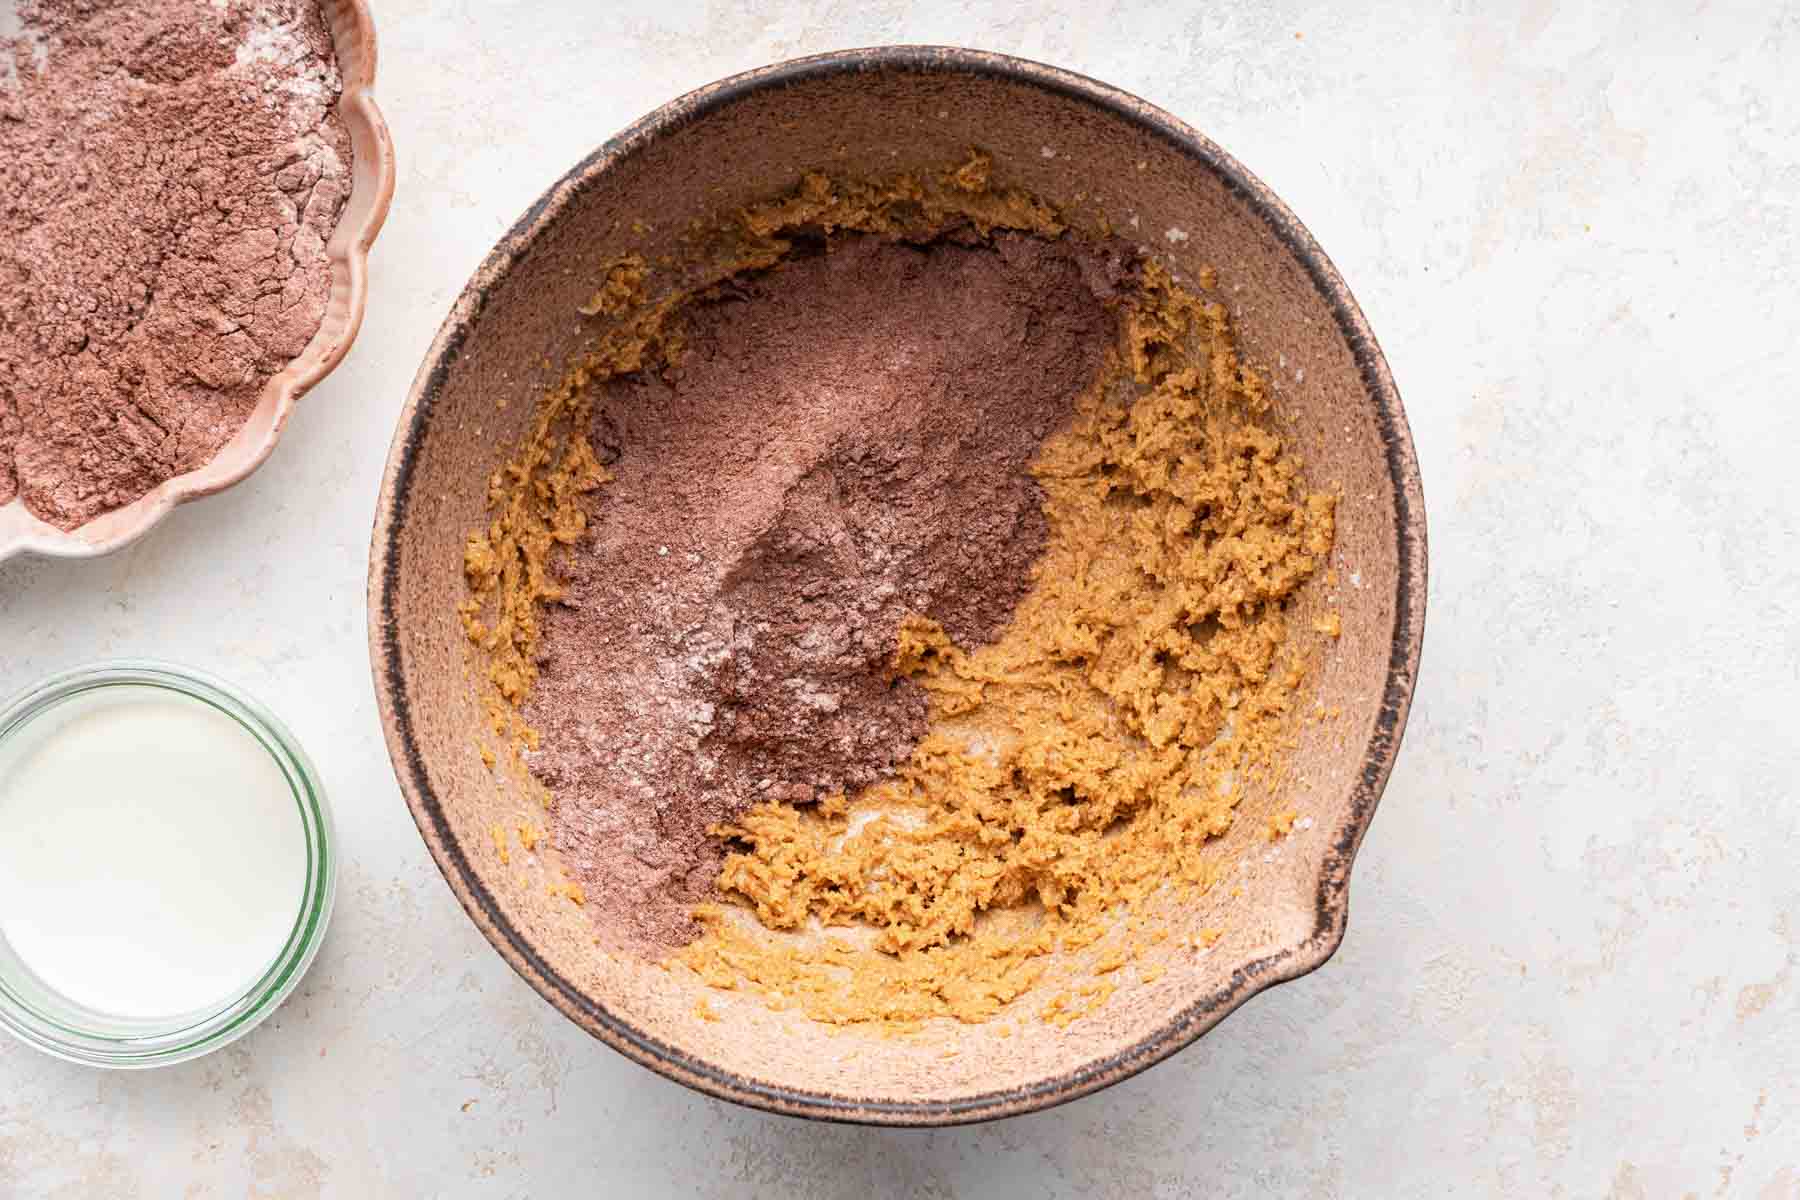 Dry cocoa powder over yellow cookie dough.